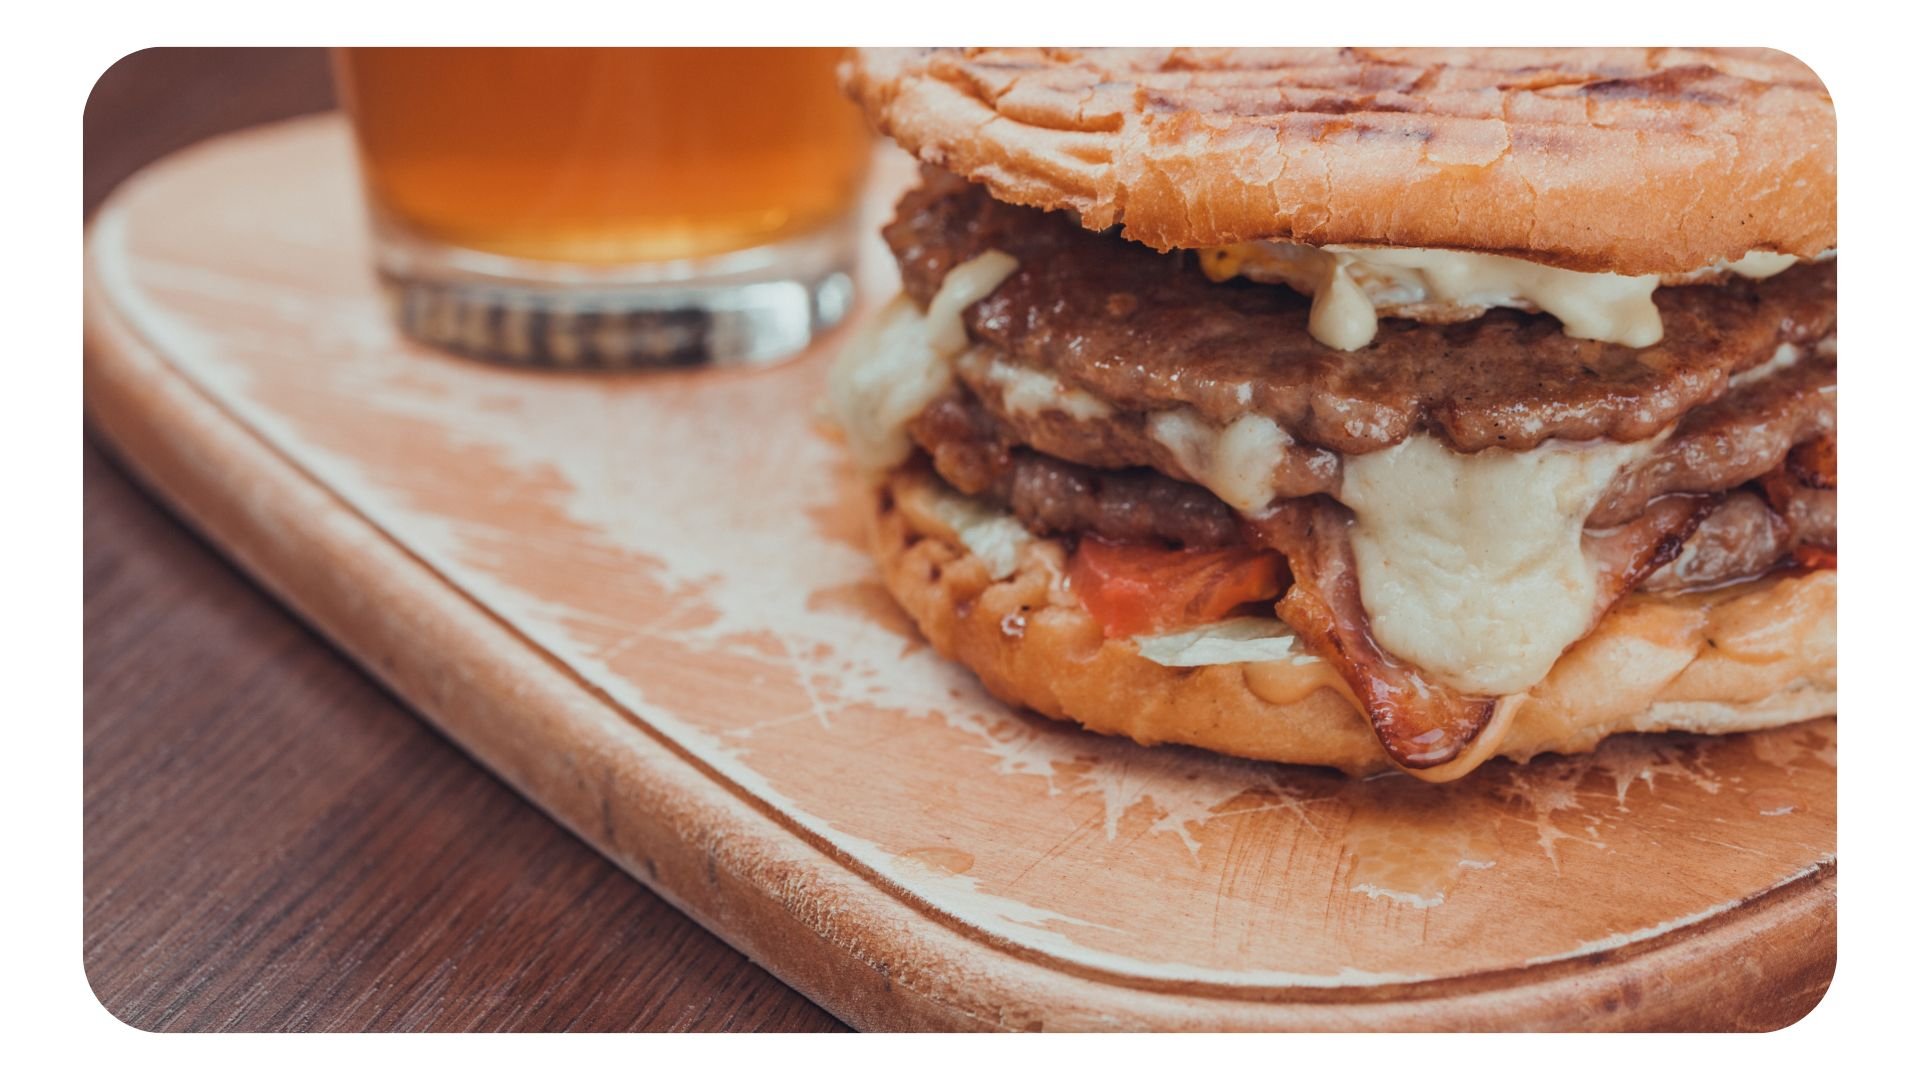 Shot of burger and beer which is a classic father's day promotion idea